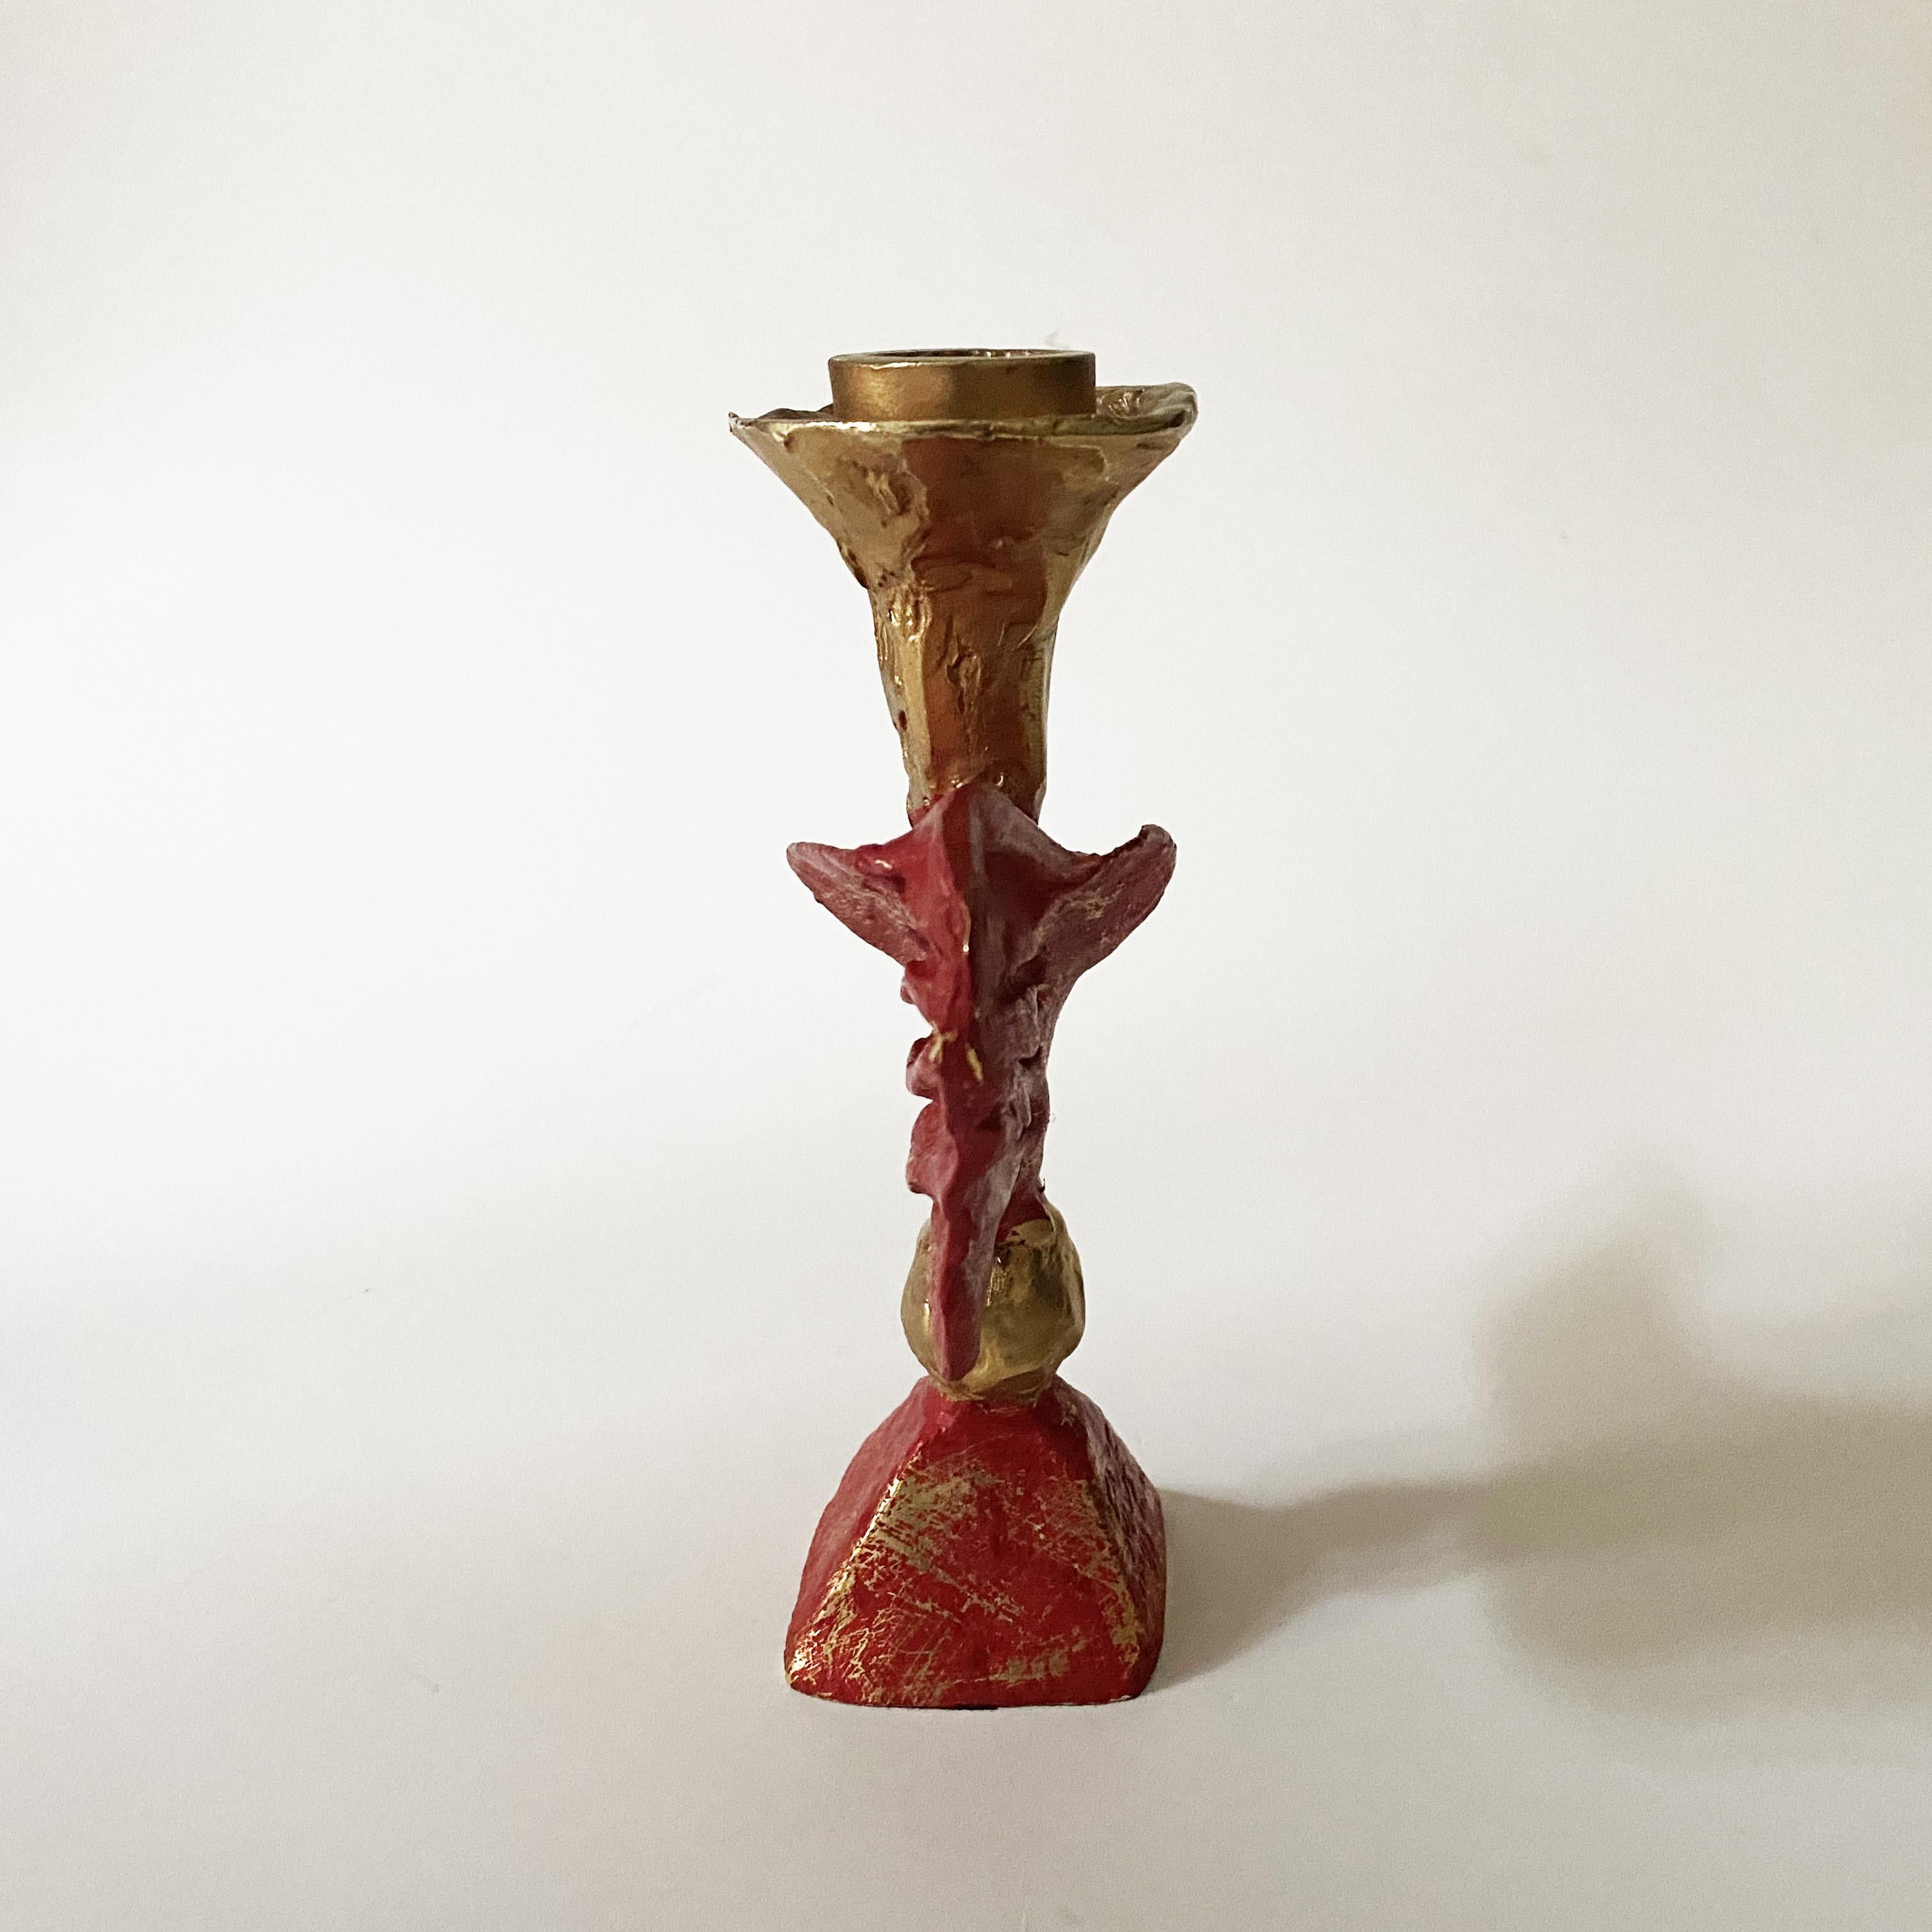 Gilded & Red Sculptural Bird Candlestick by Pierre Casenove for Fondica, 1990s. For Sale 1